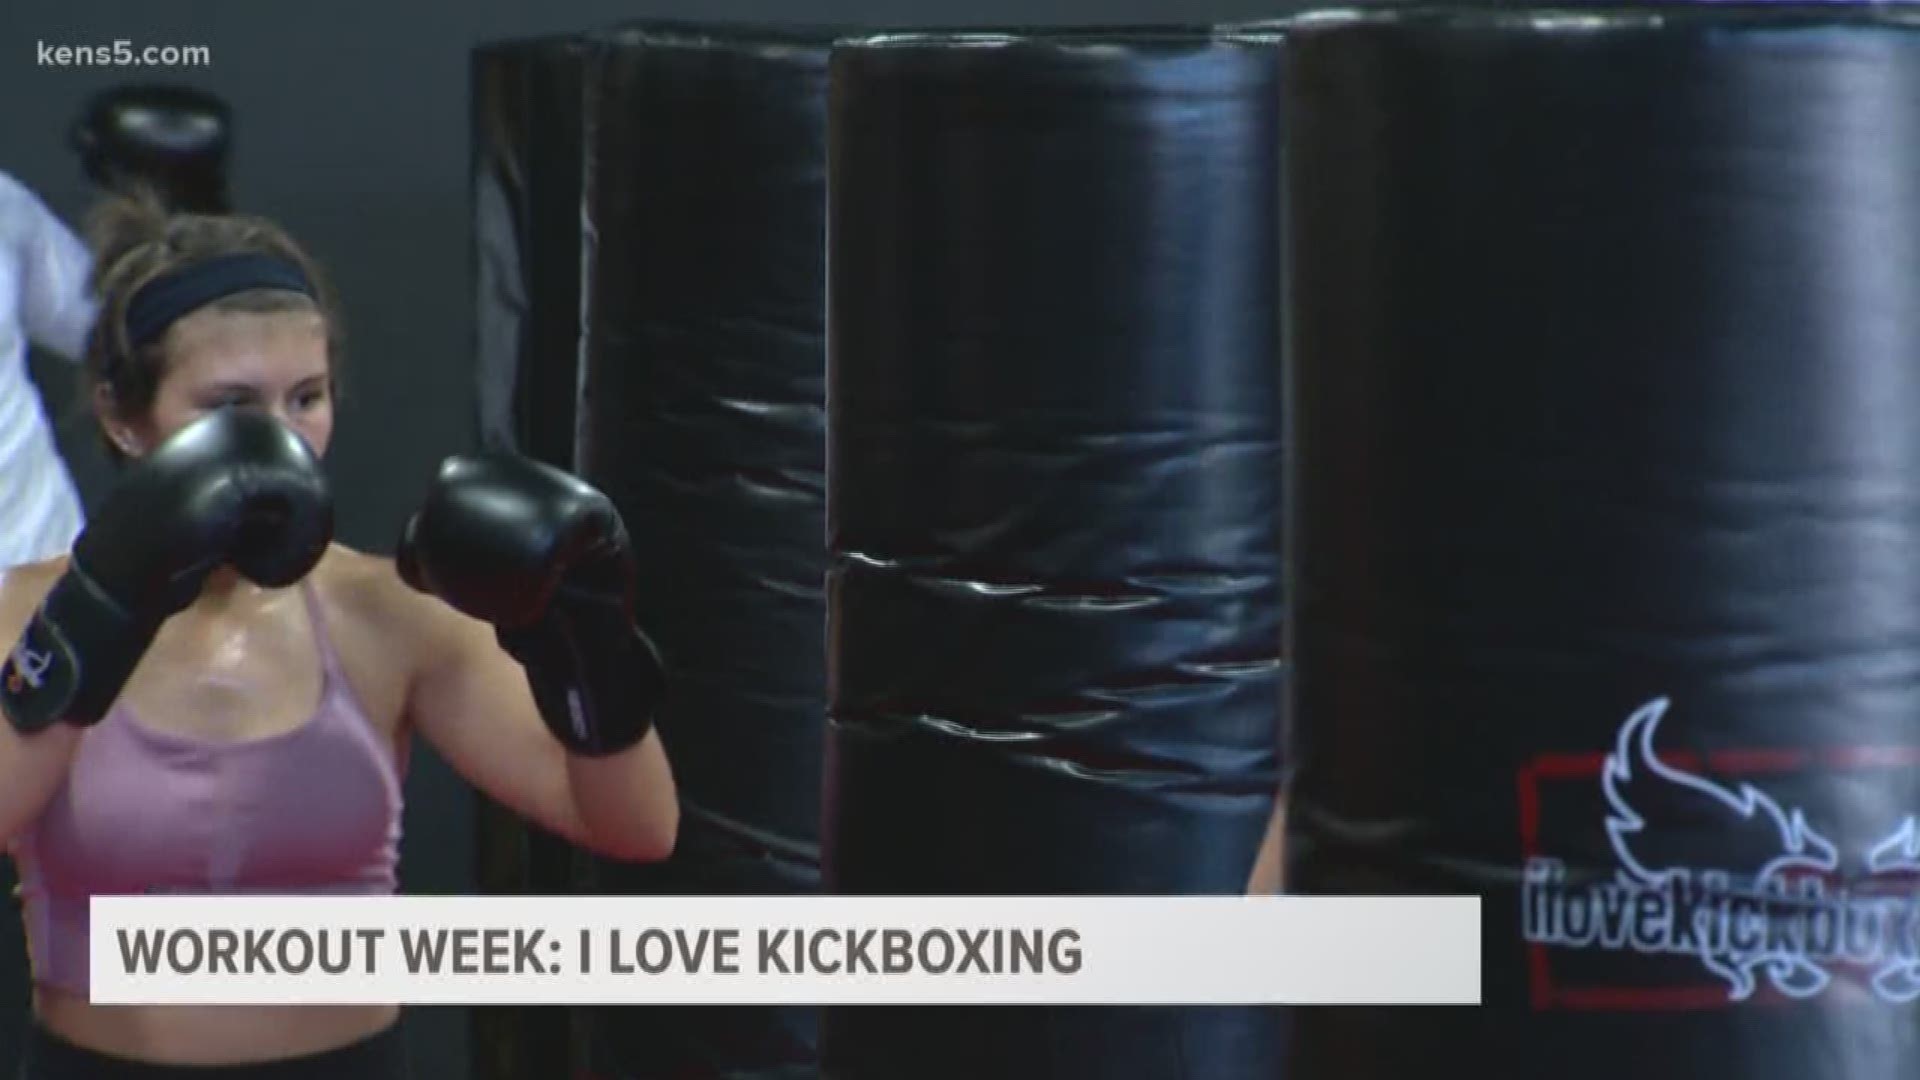 It's workout week and we are taking a look at some indoor options to work out during the brutal heat. Today, we are testing out I Love Kickboxing.